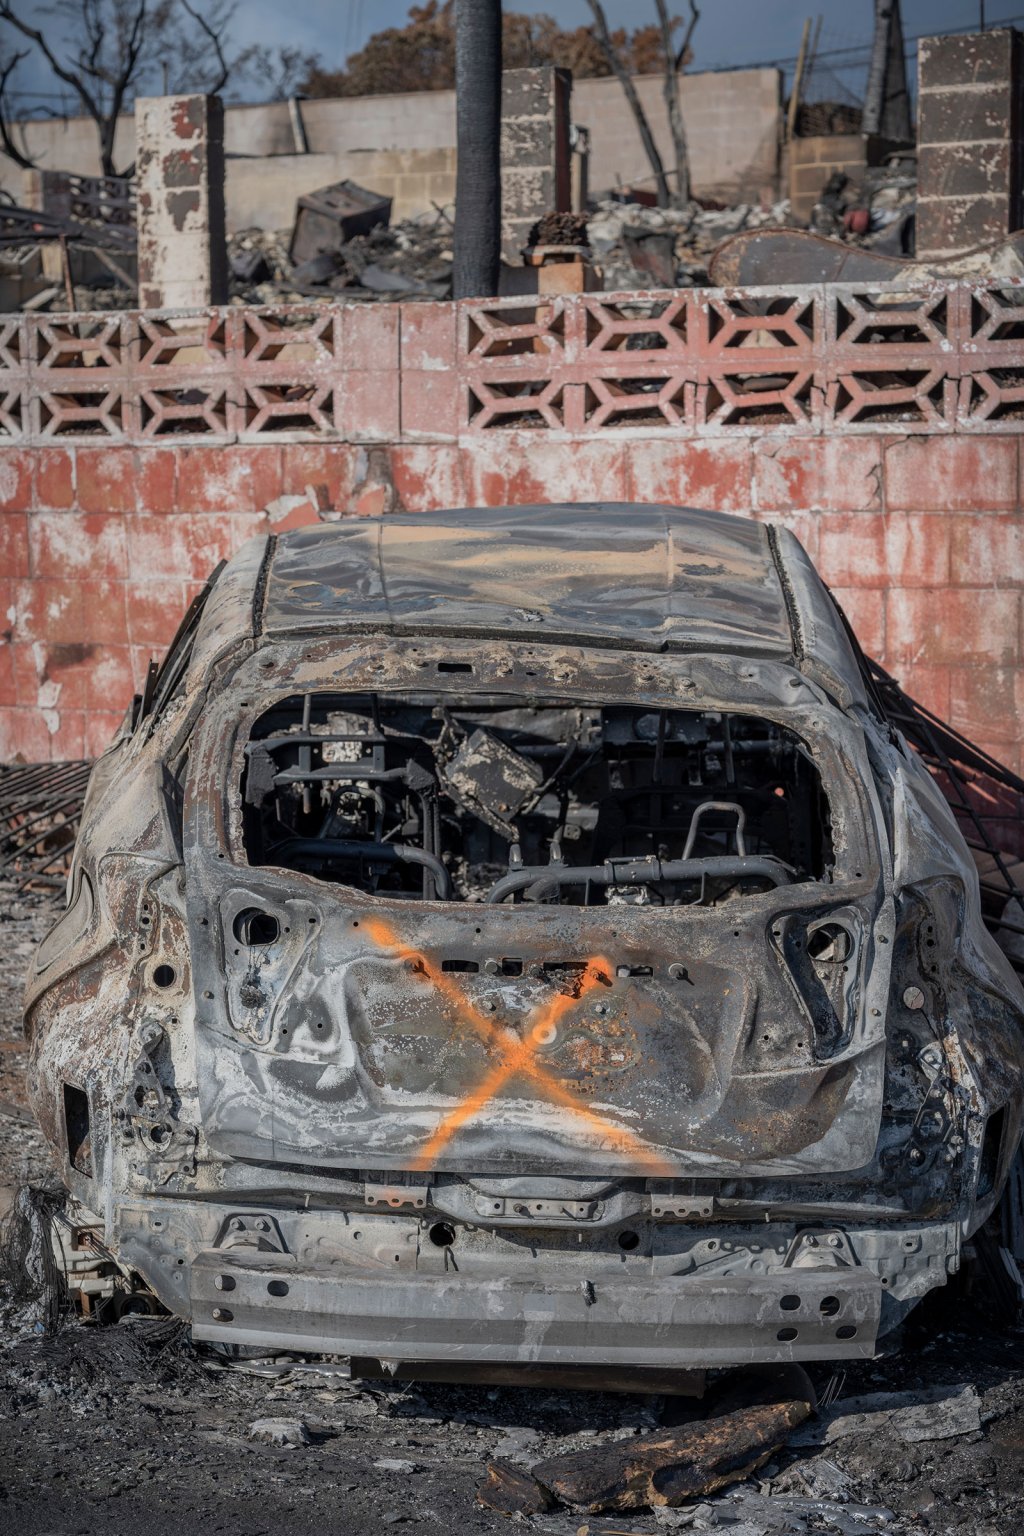 A destroyed vehicle in Lahaina on Aug. 14. Some of the burned vehicles show an “X” which was painted by search and rescue crews signifying the vehicle has been checked and does not contain human remains.